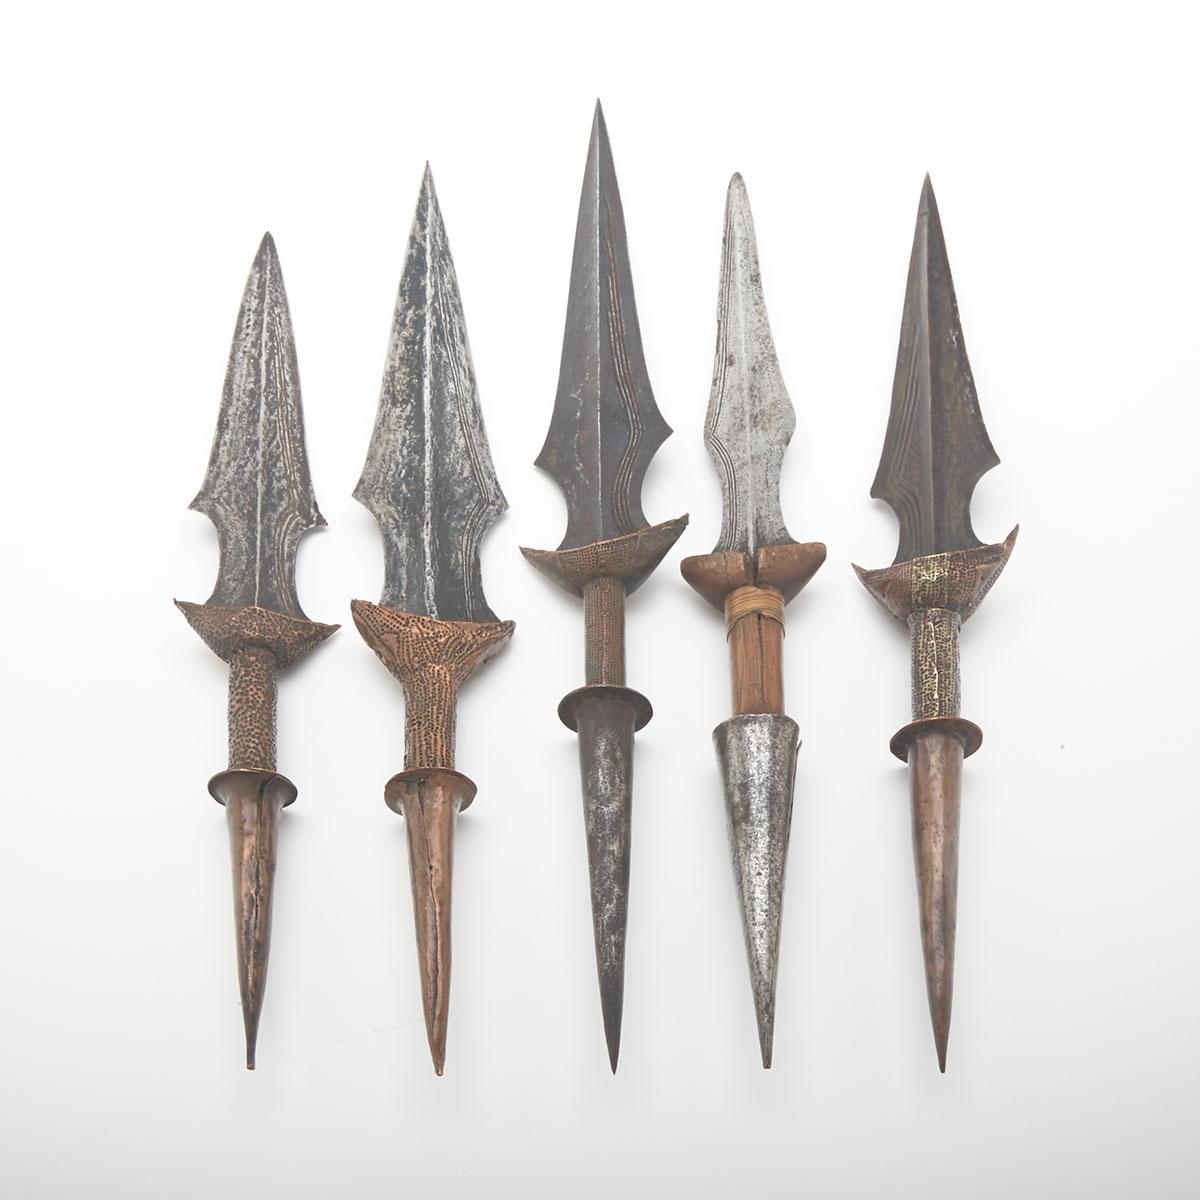 Five African Tetela Copper and Steel Daggers, Zaire, 19th century